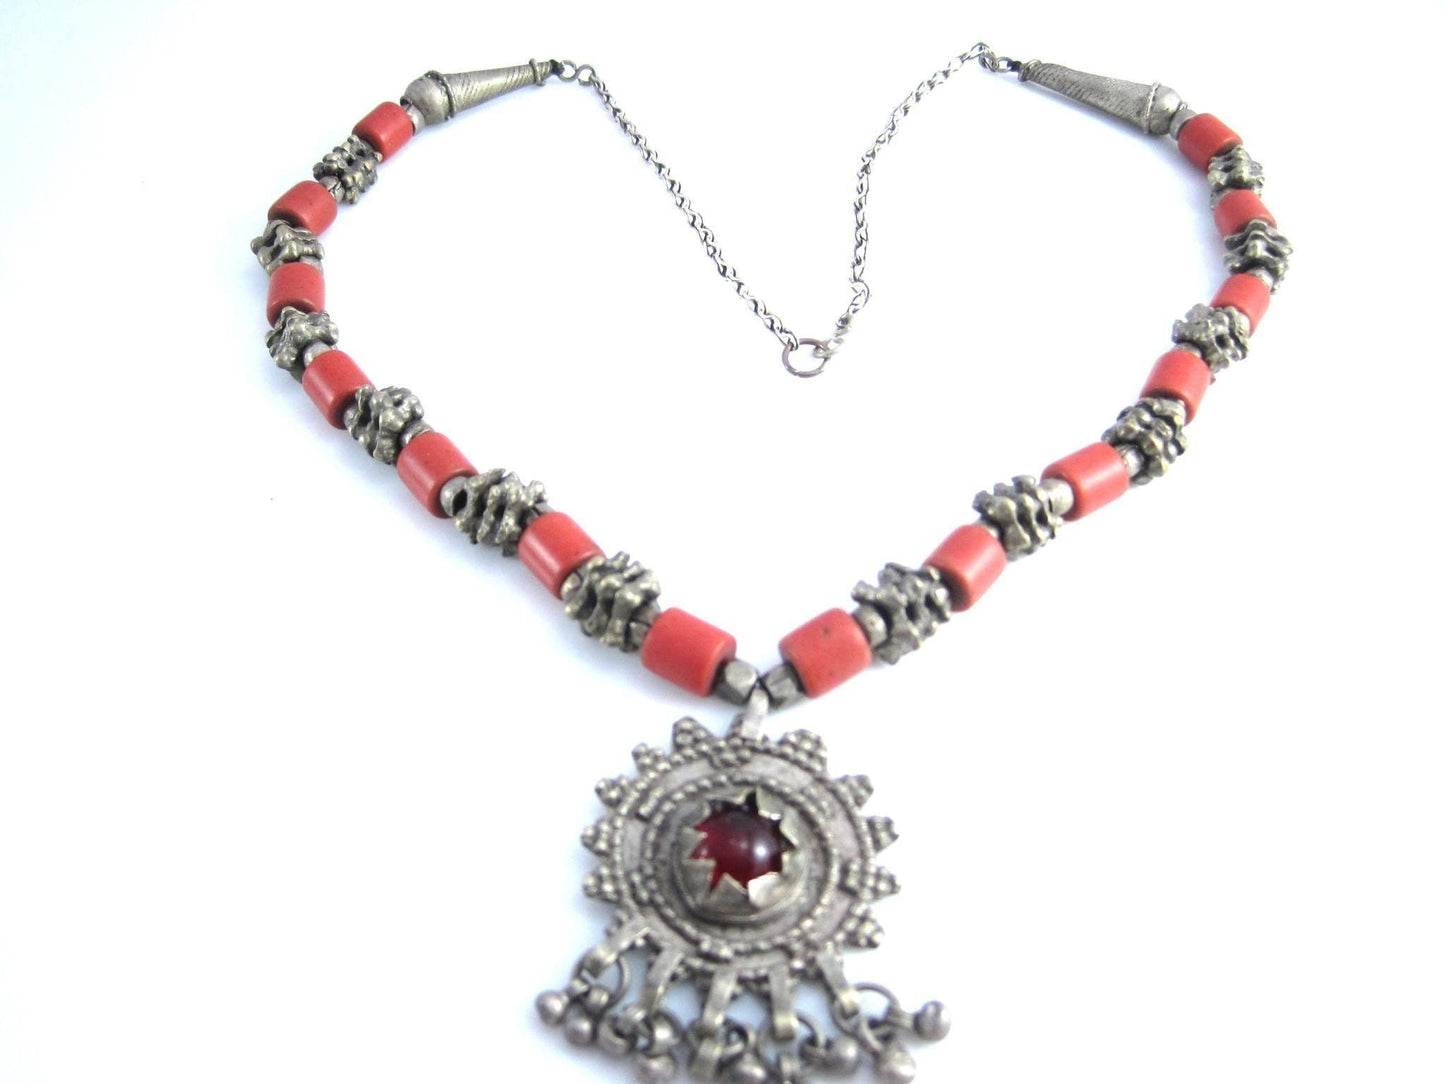 Vintage Yemeni Bedouin Necklace with Silver and Coral Colored Trade Beads - Anteeka